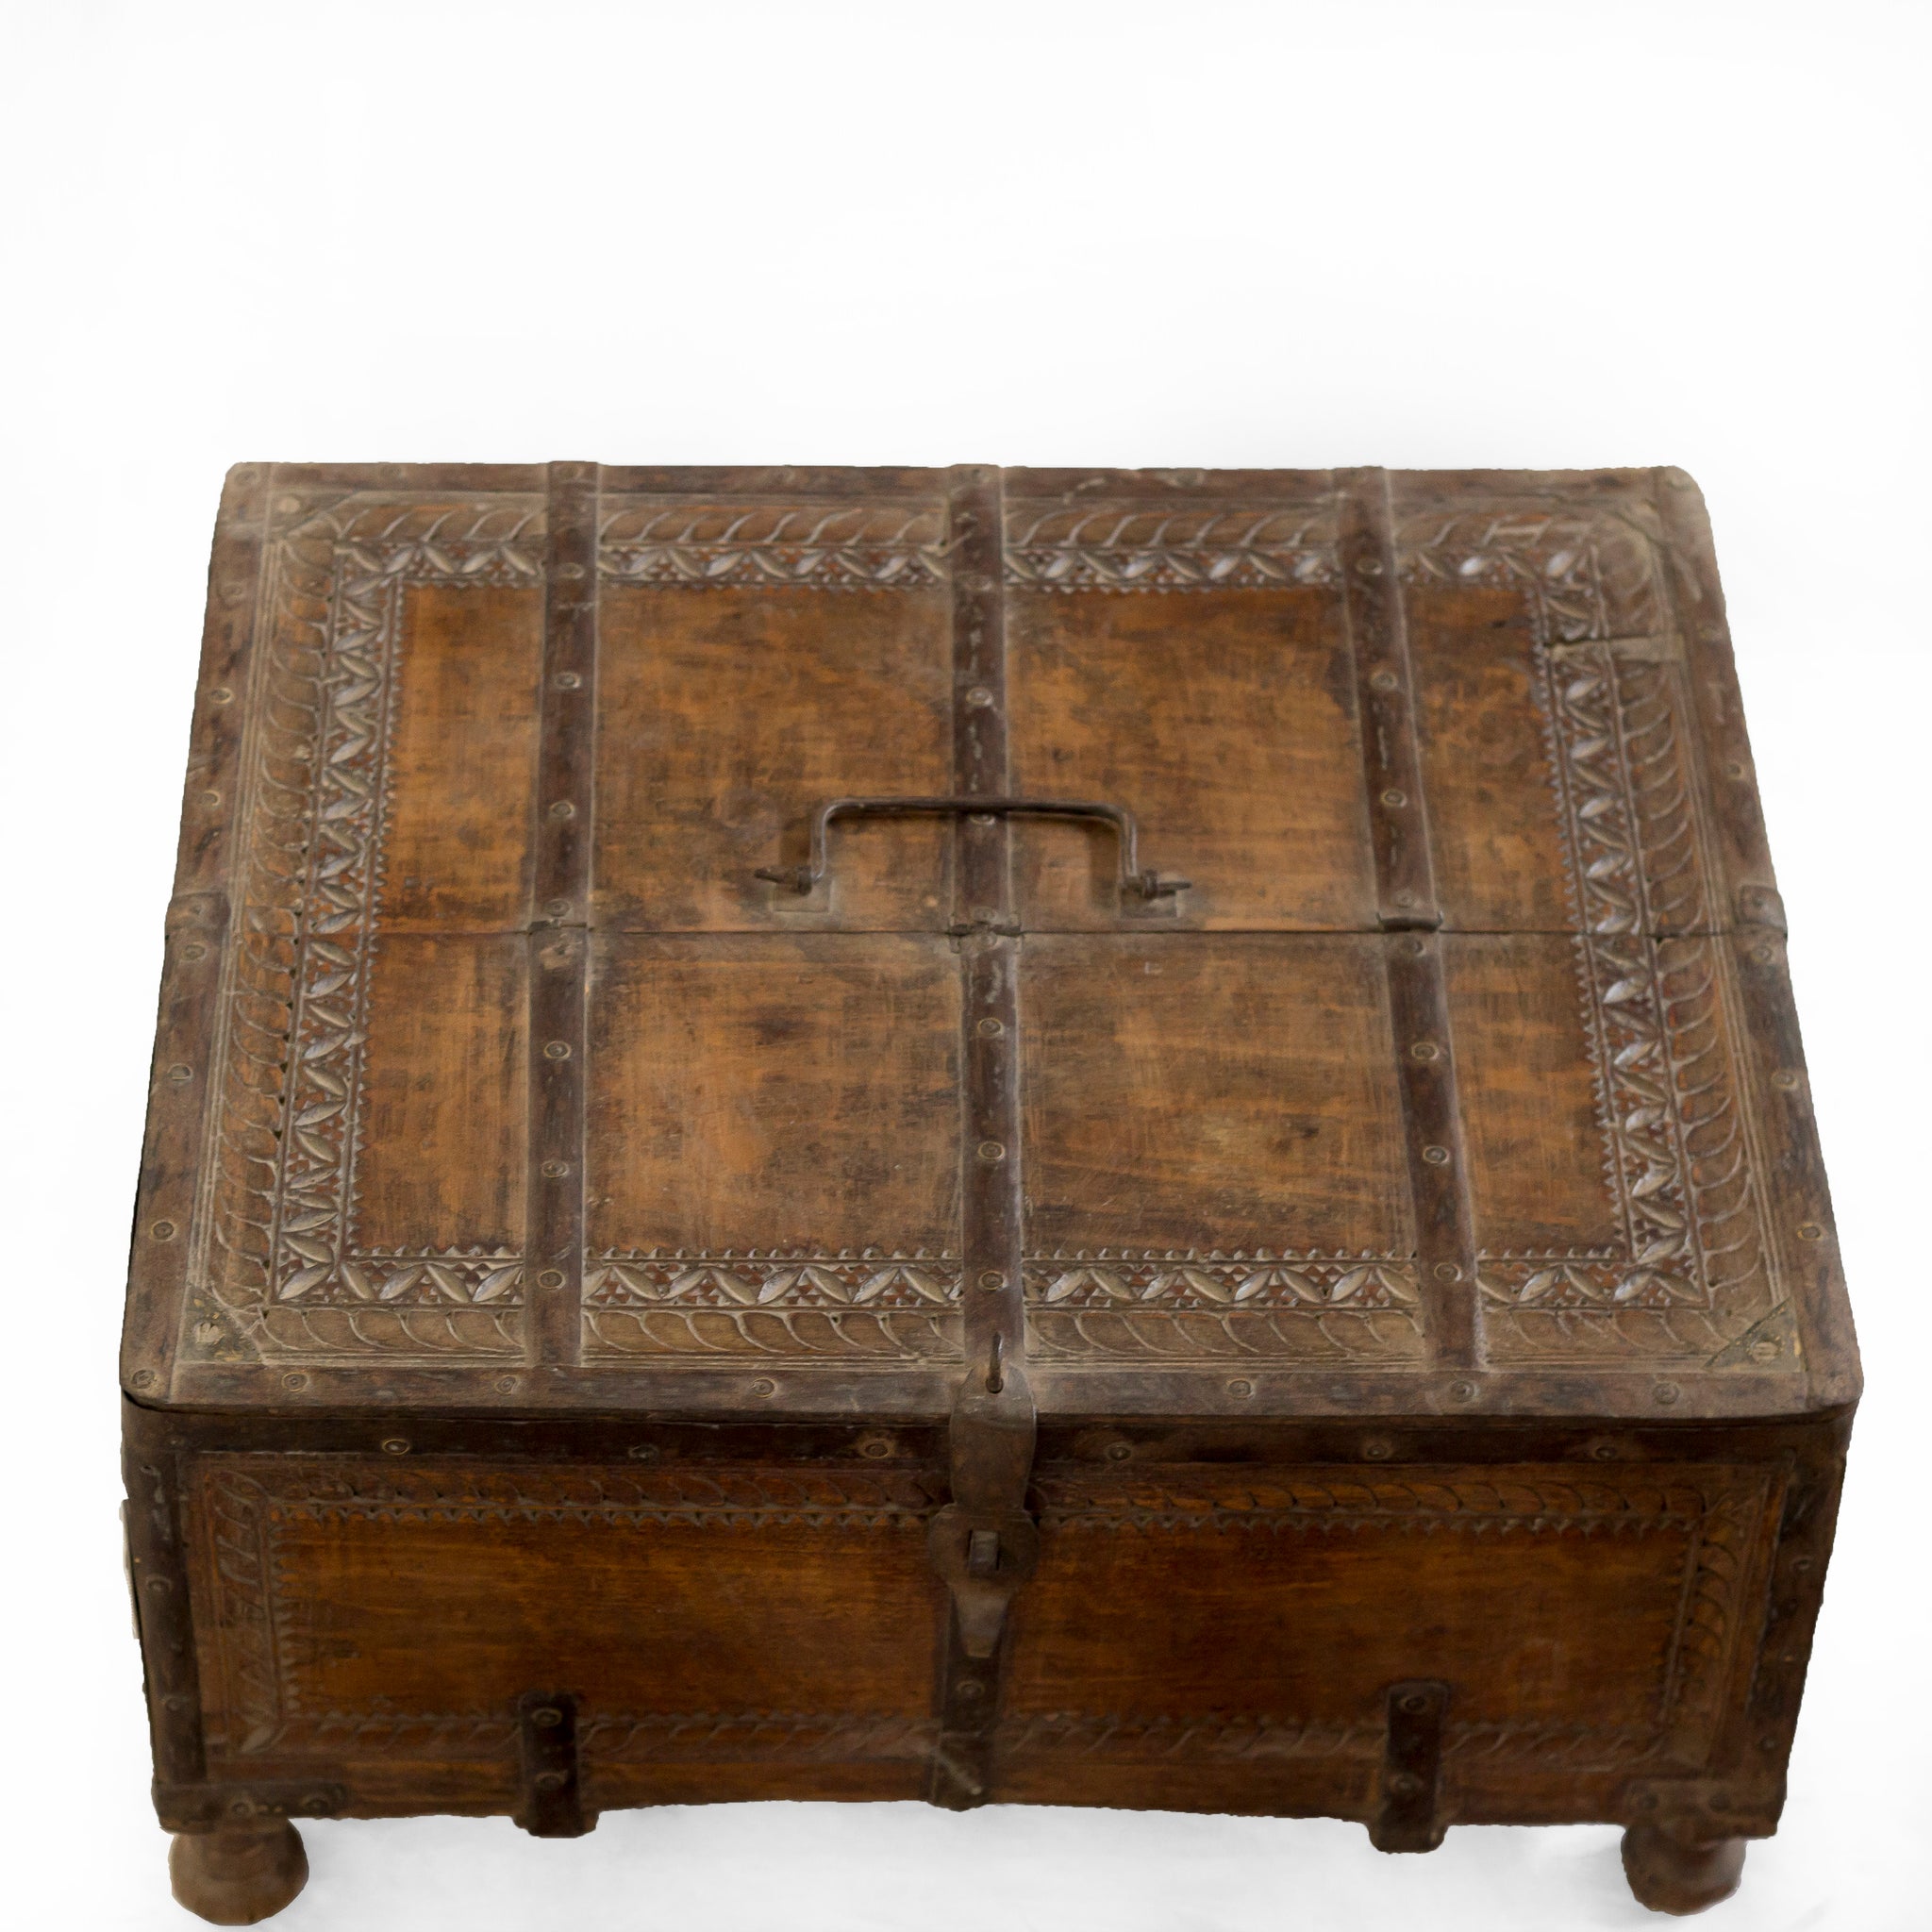 WOODEN CHEST WITH METAL FITTINGS